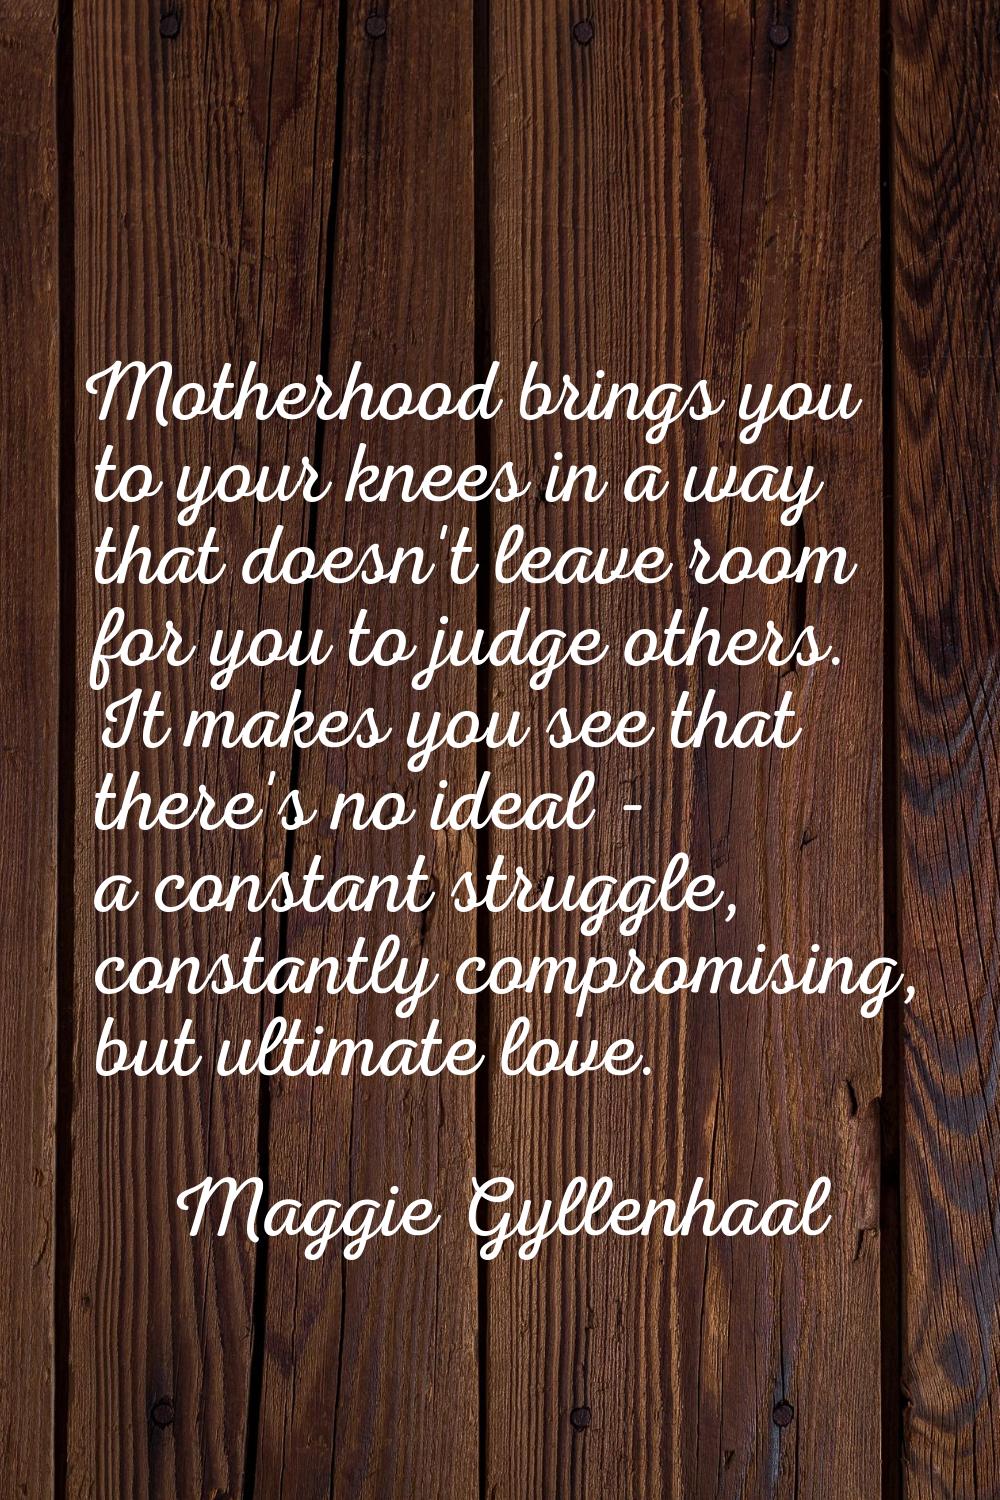 Motherhood brings you to your knees in a way that doesn't leave room for you to judge others. It ma